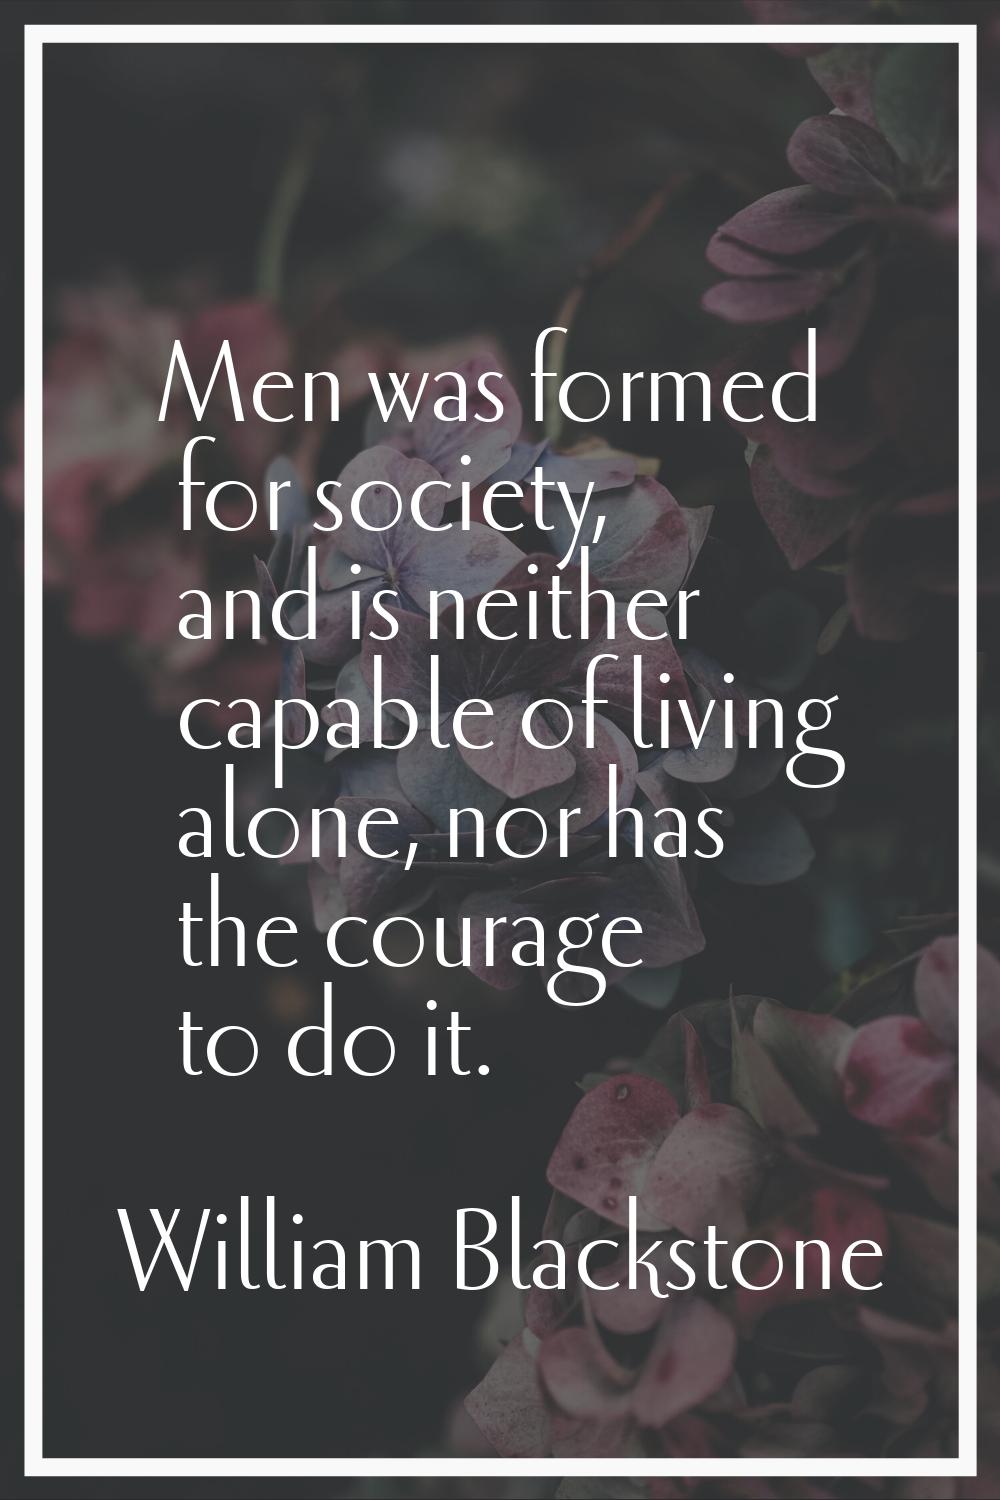 Men was formed for society, and is neither capable of living alone, nor has the courage to do it.